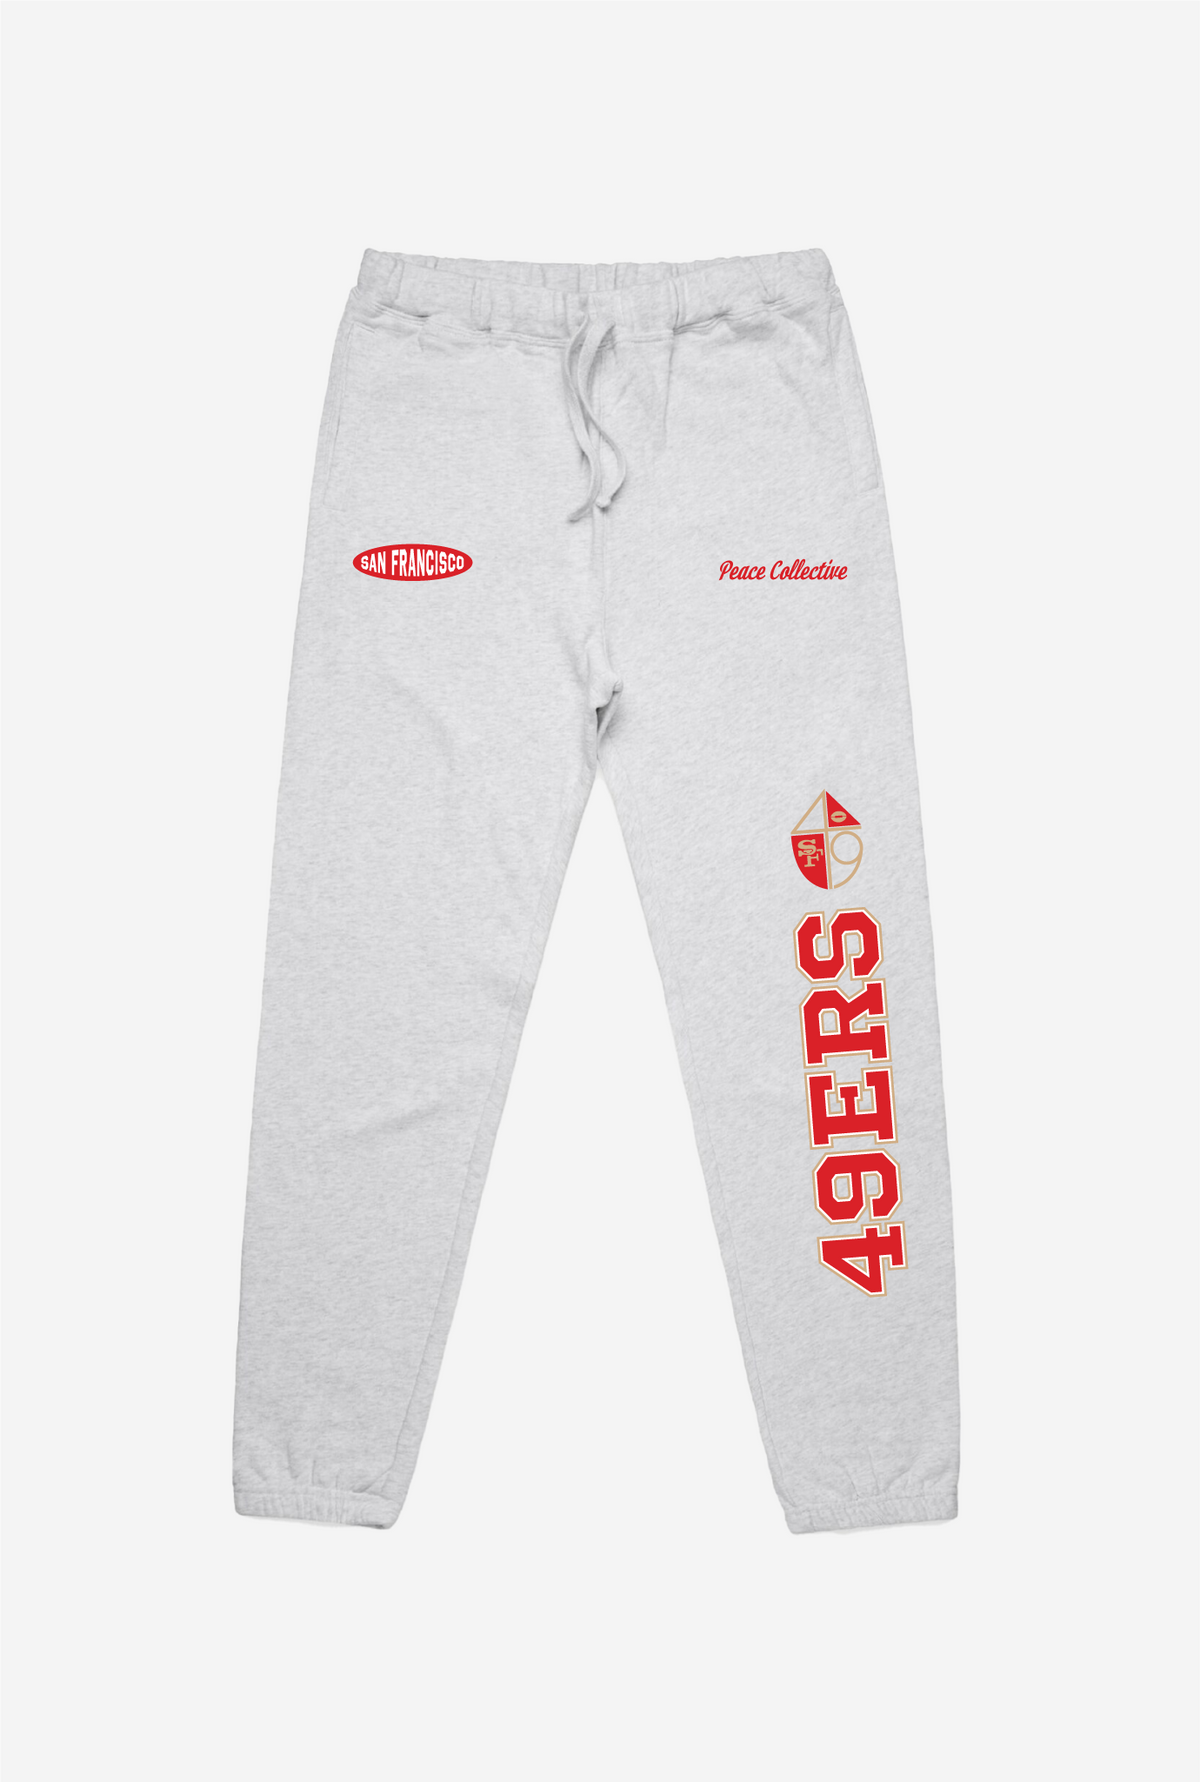 San Francisco 49ers Washed Graphic Joggers - Ash